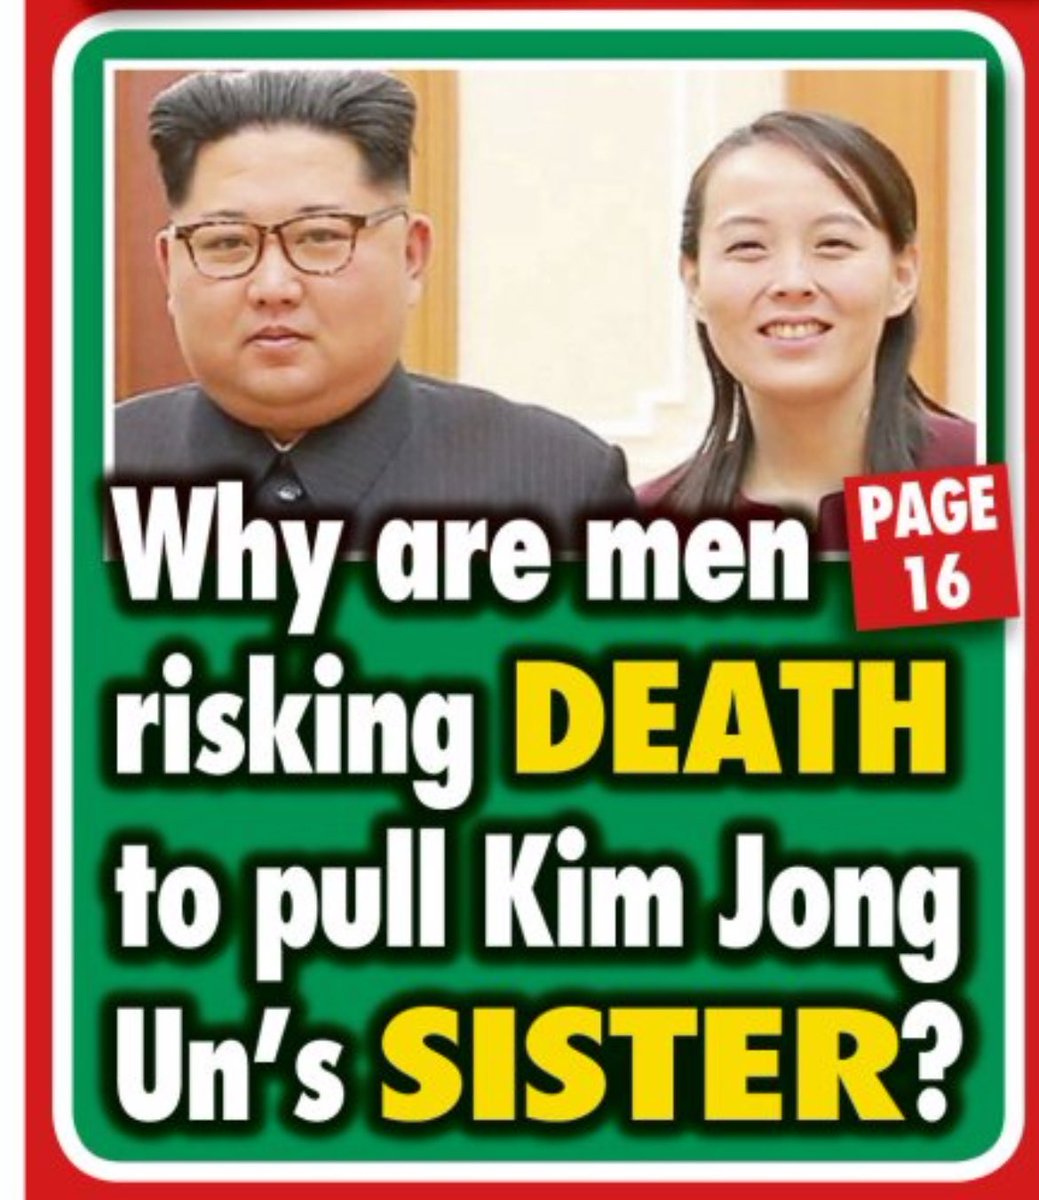 The Sunday Sport asking the important questions no other publications dare ask. (She’s married, lads)